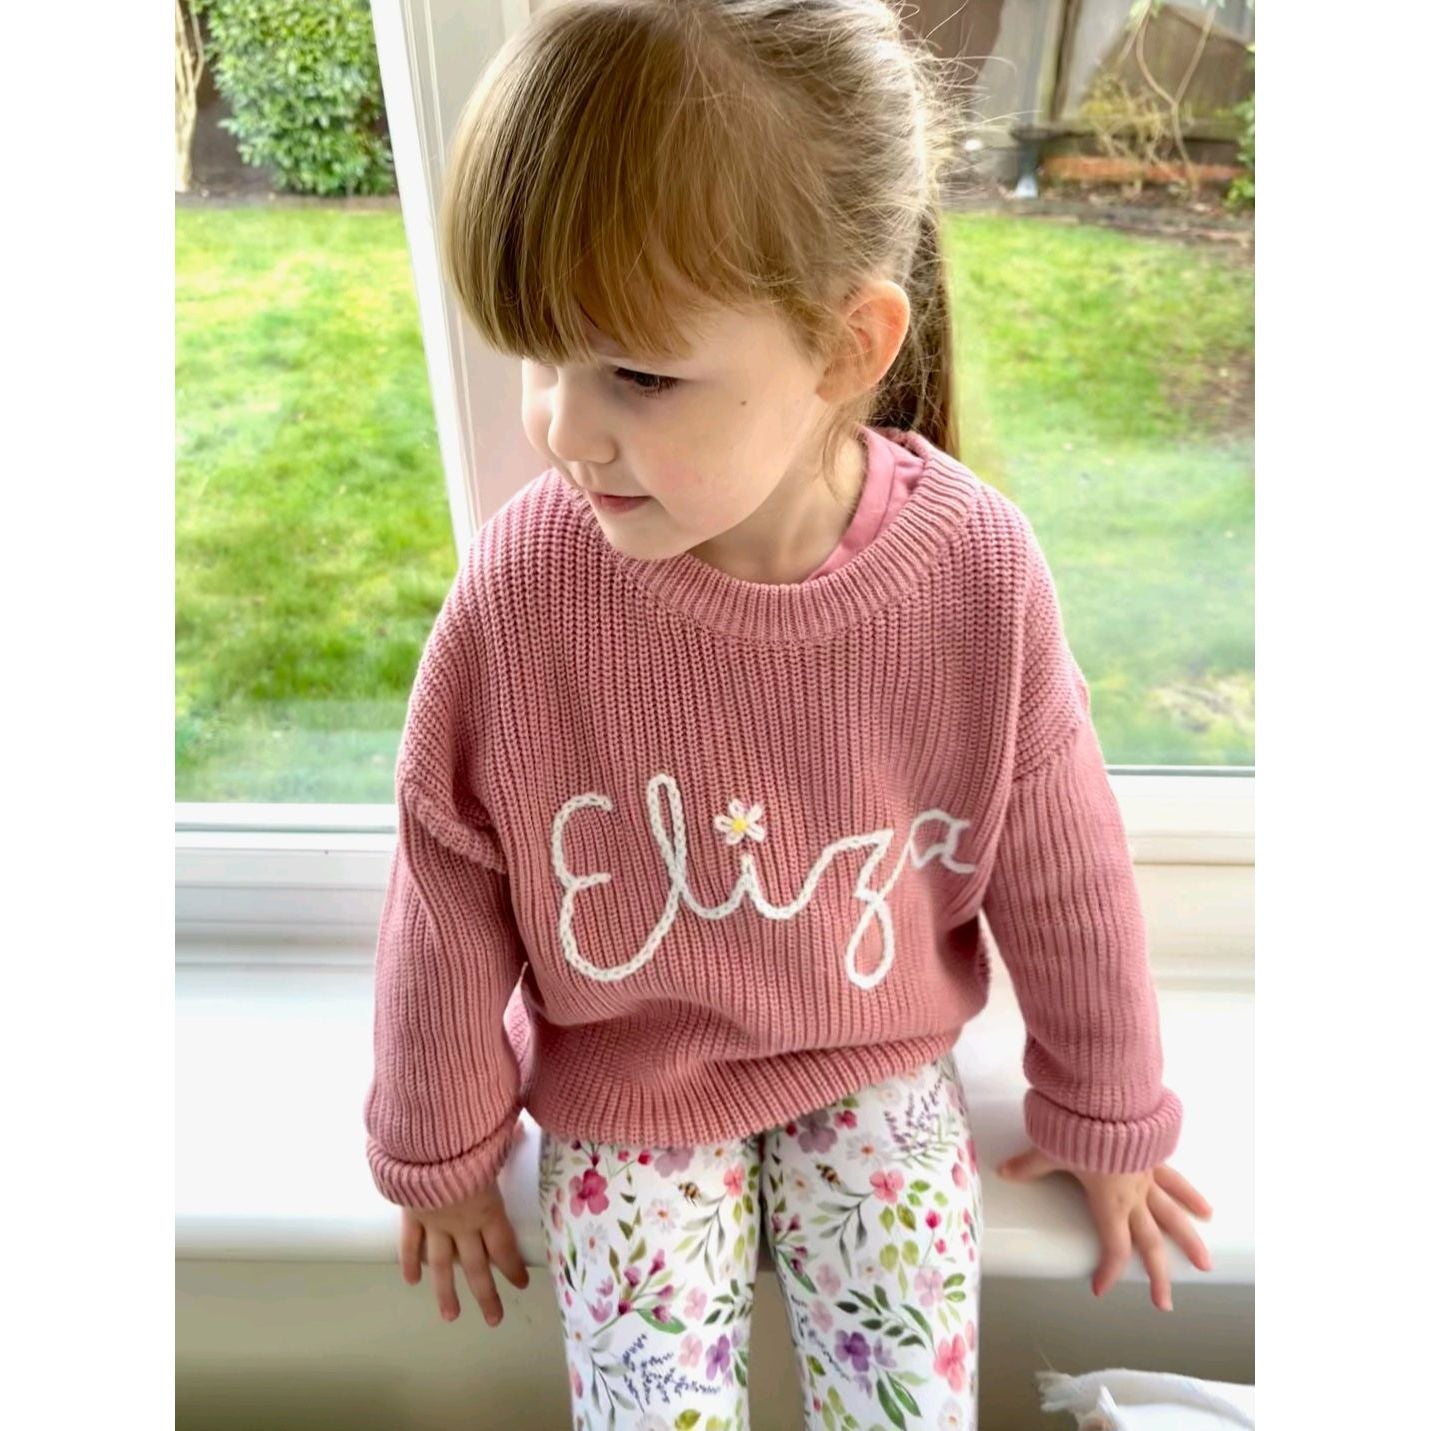 Embroidered Name Jumper with Flowers